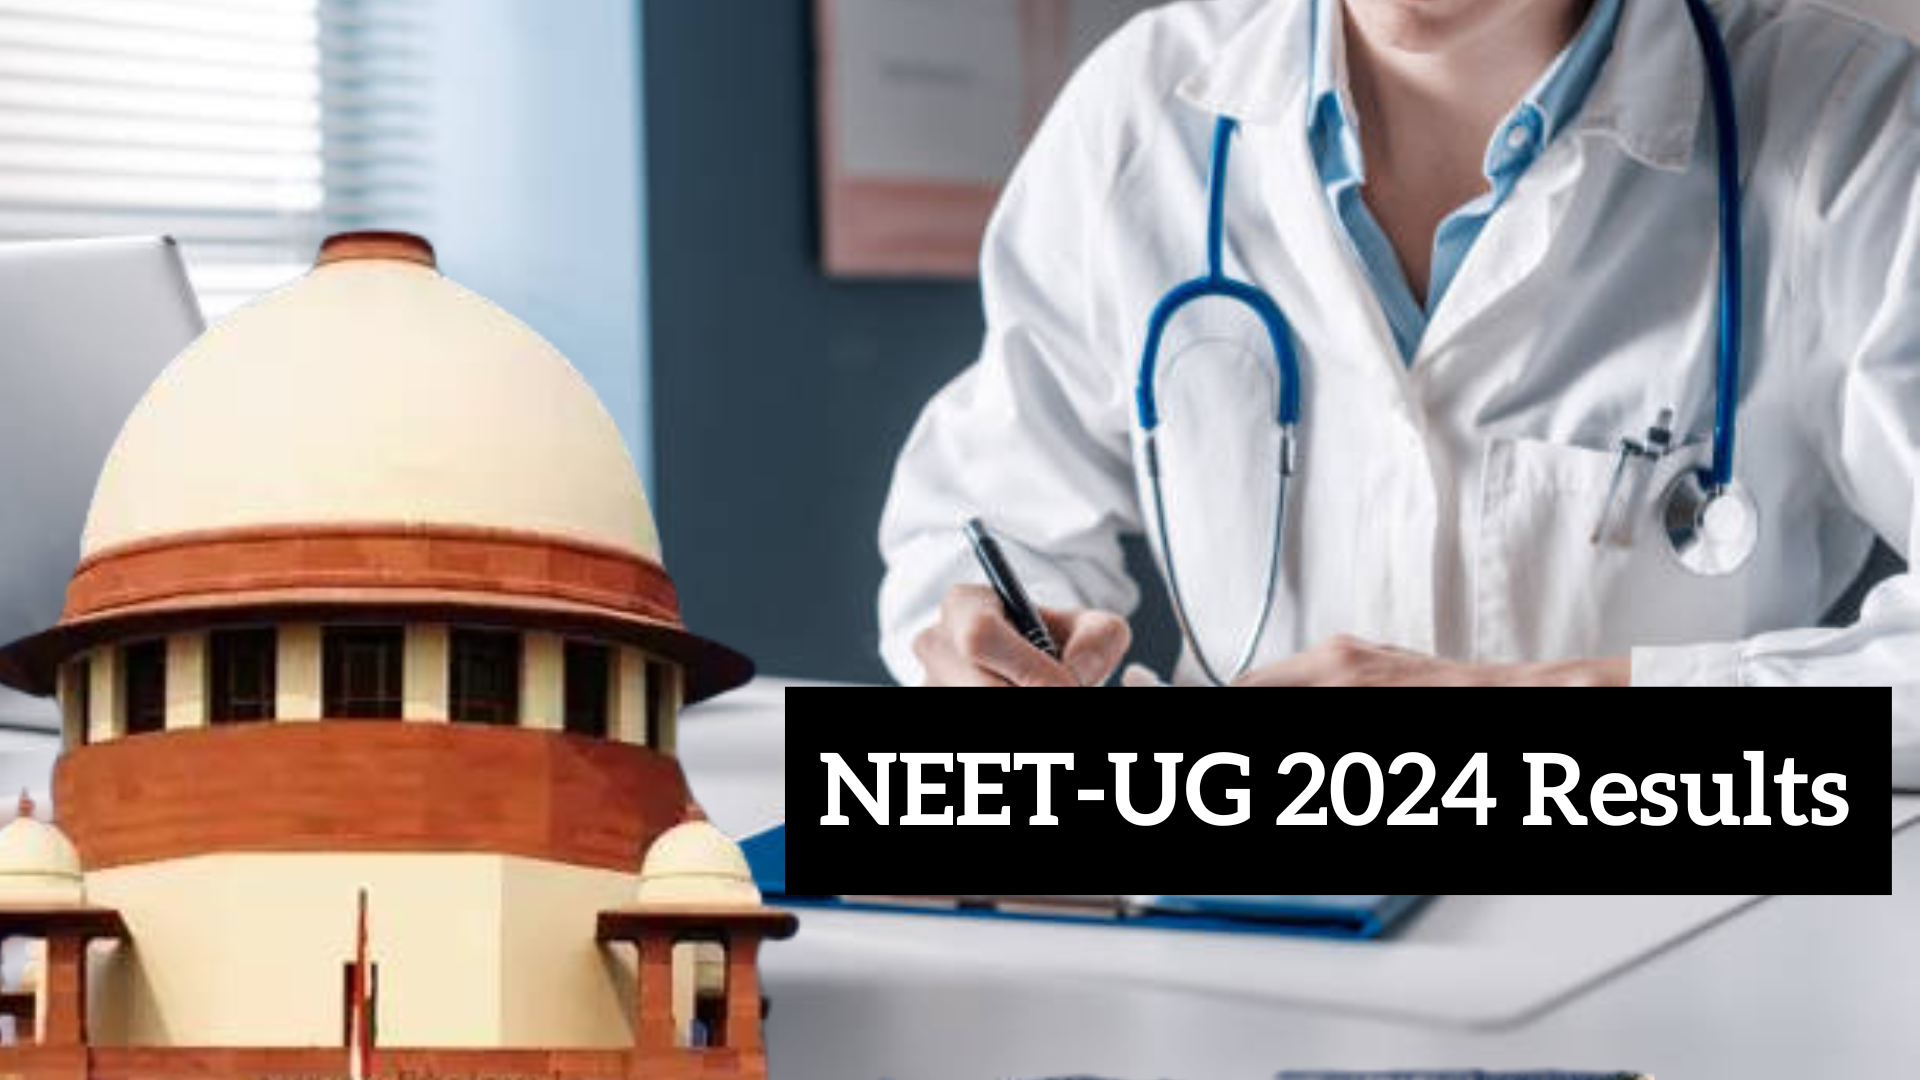 NEET-UG Results 2024 Update | All Controversies Around the ‘Exam’ Explained